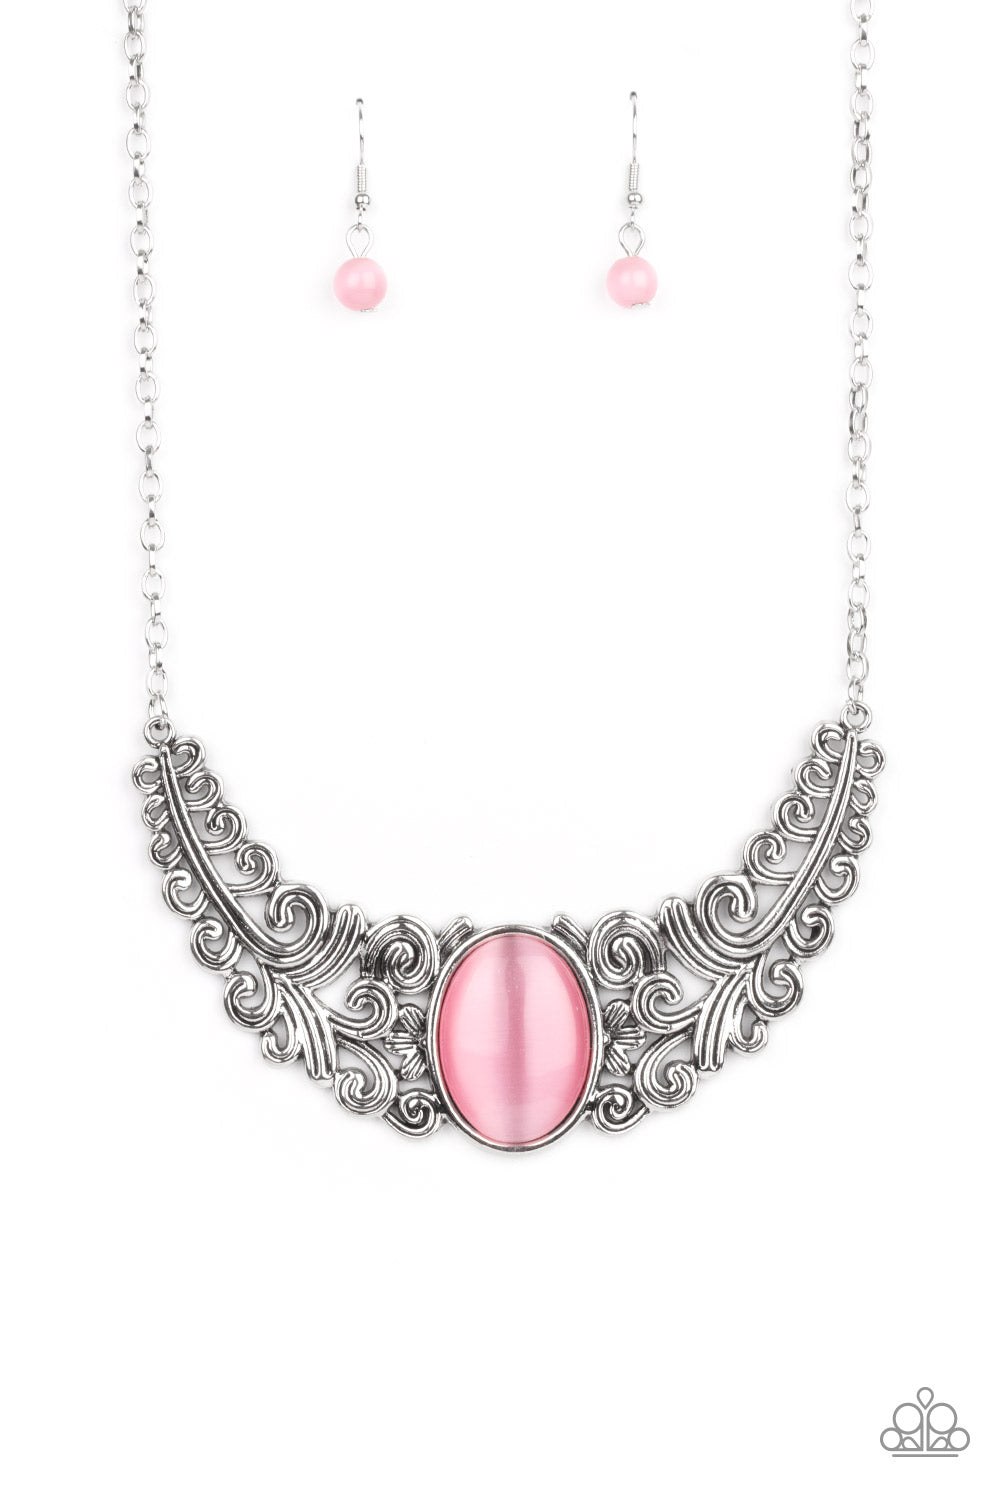 Celestial Eden - Pink - Spiffy Chick Jewelry